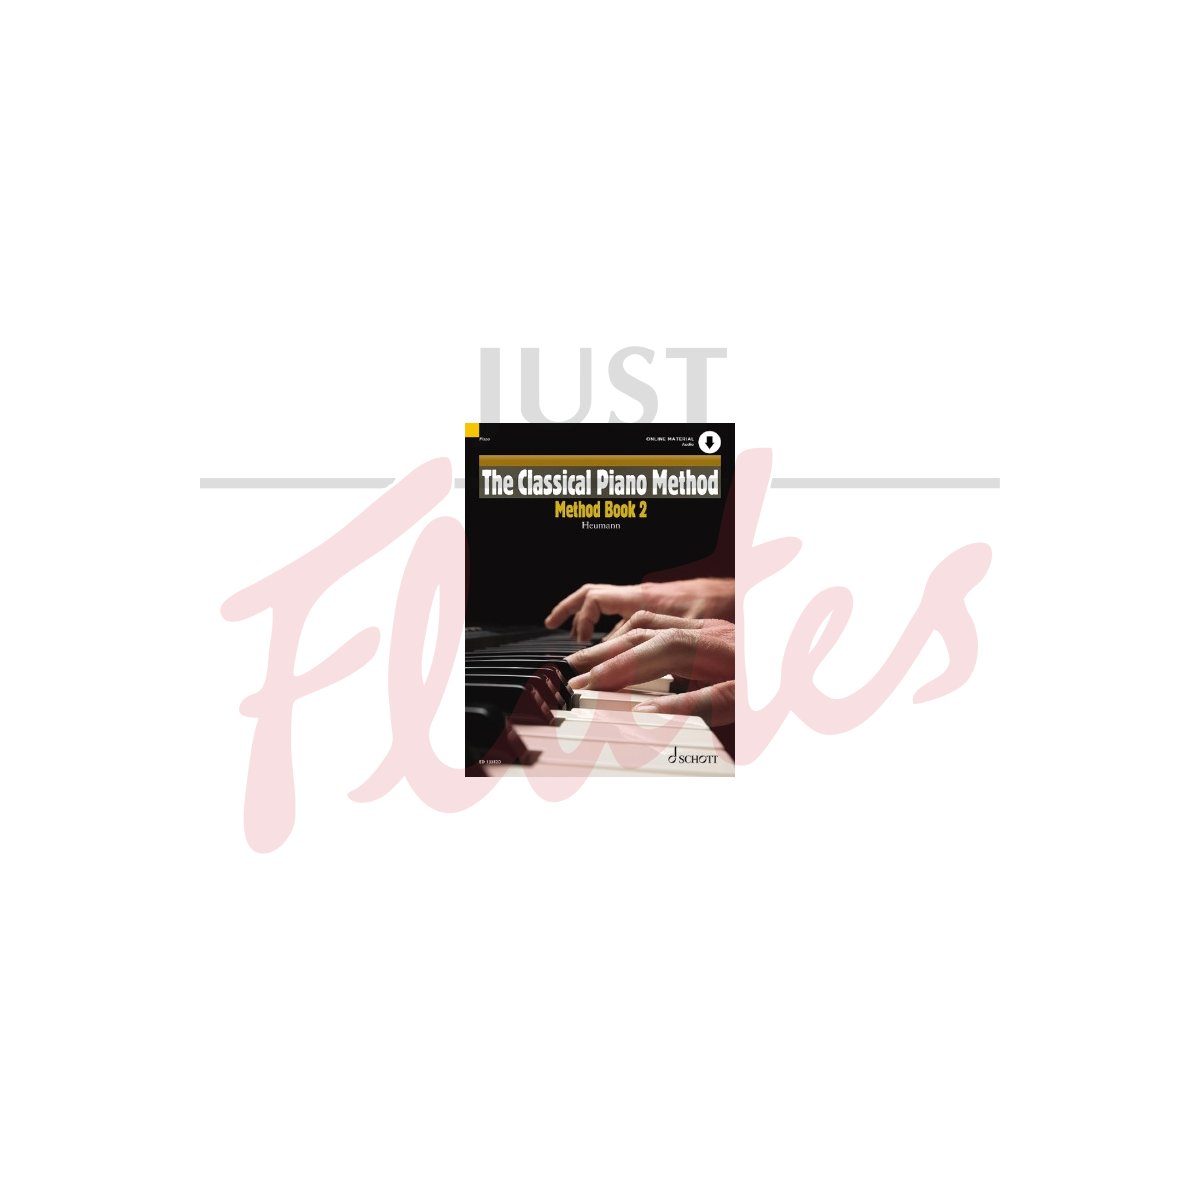 The Classical Piano Method Book 2